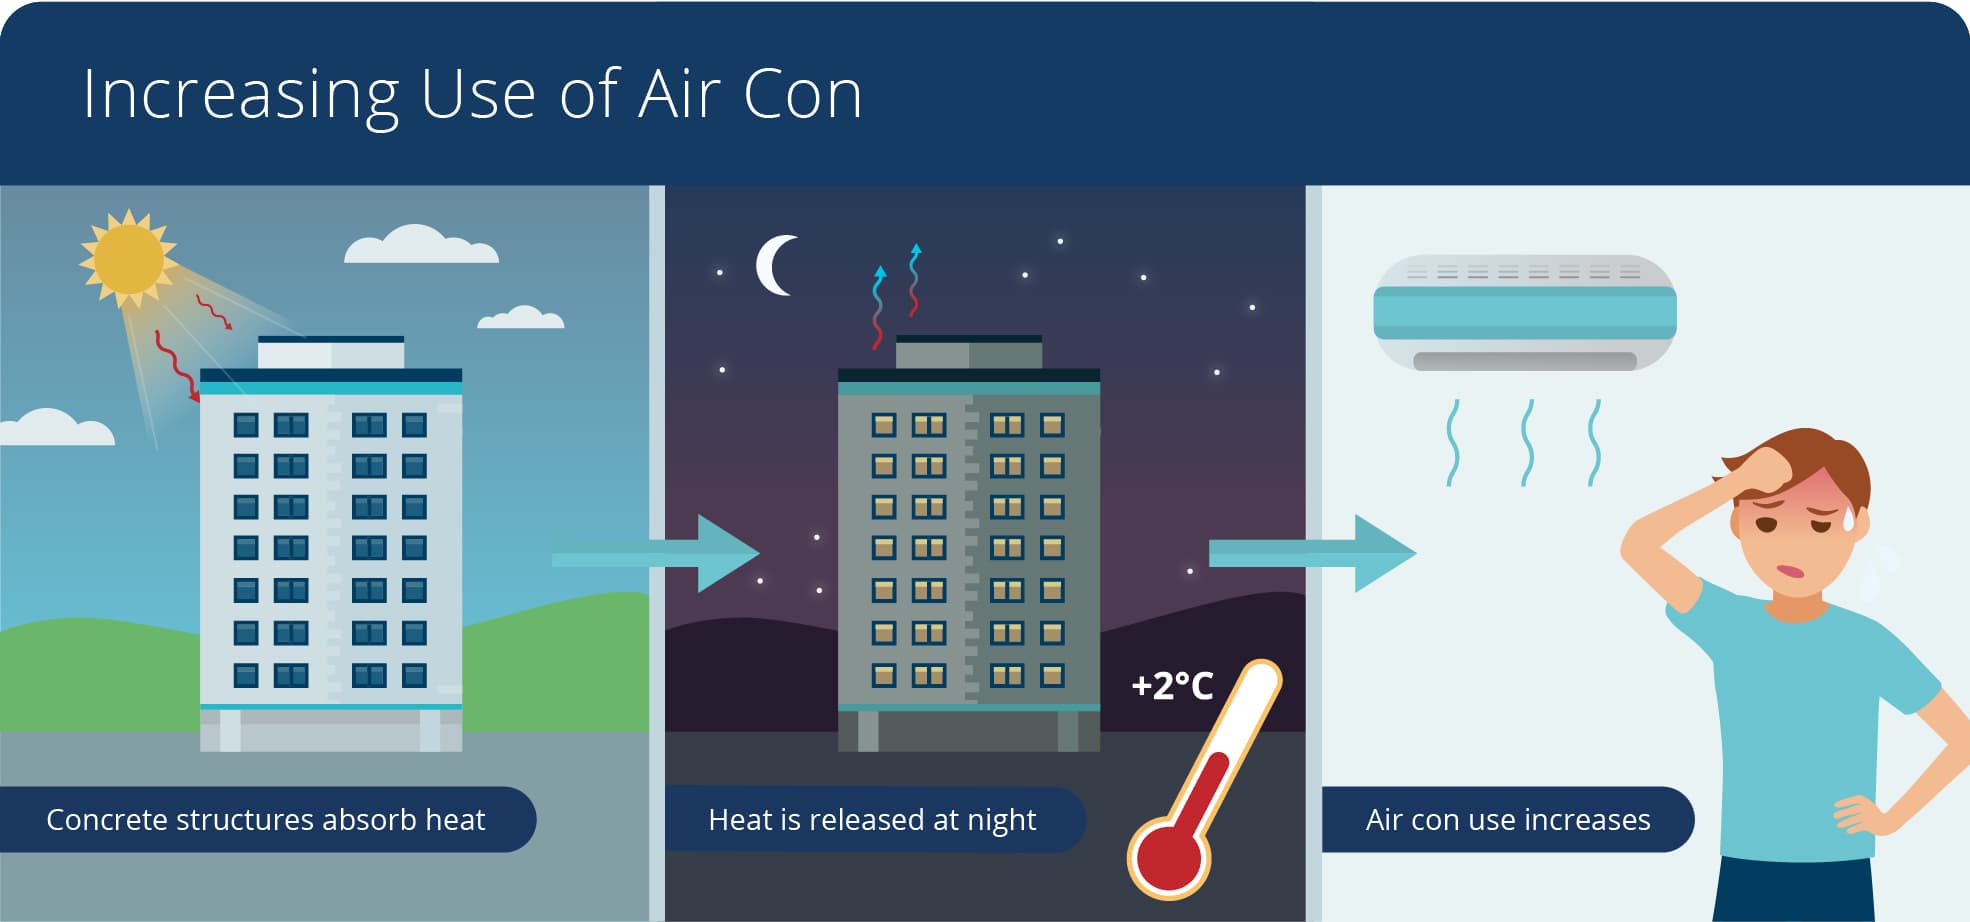 increased use of air conditioning infographic